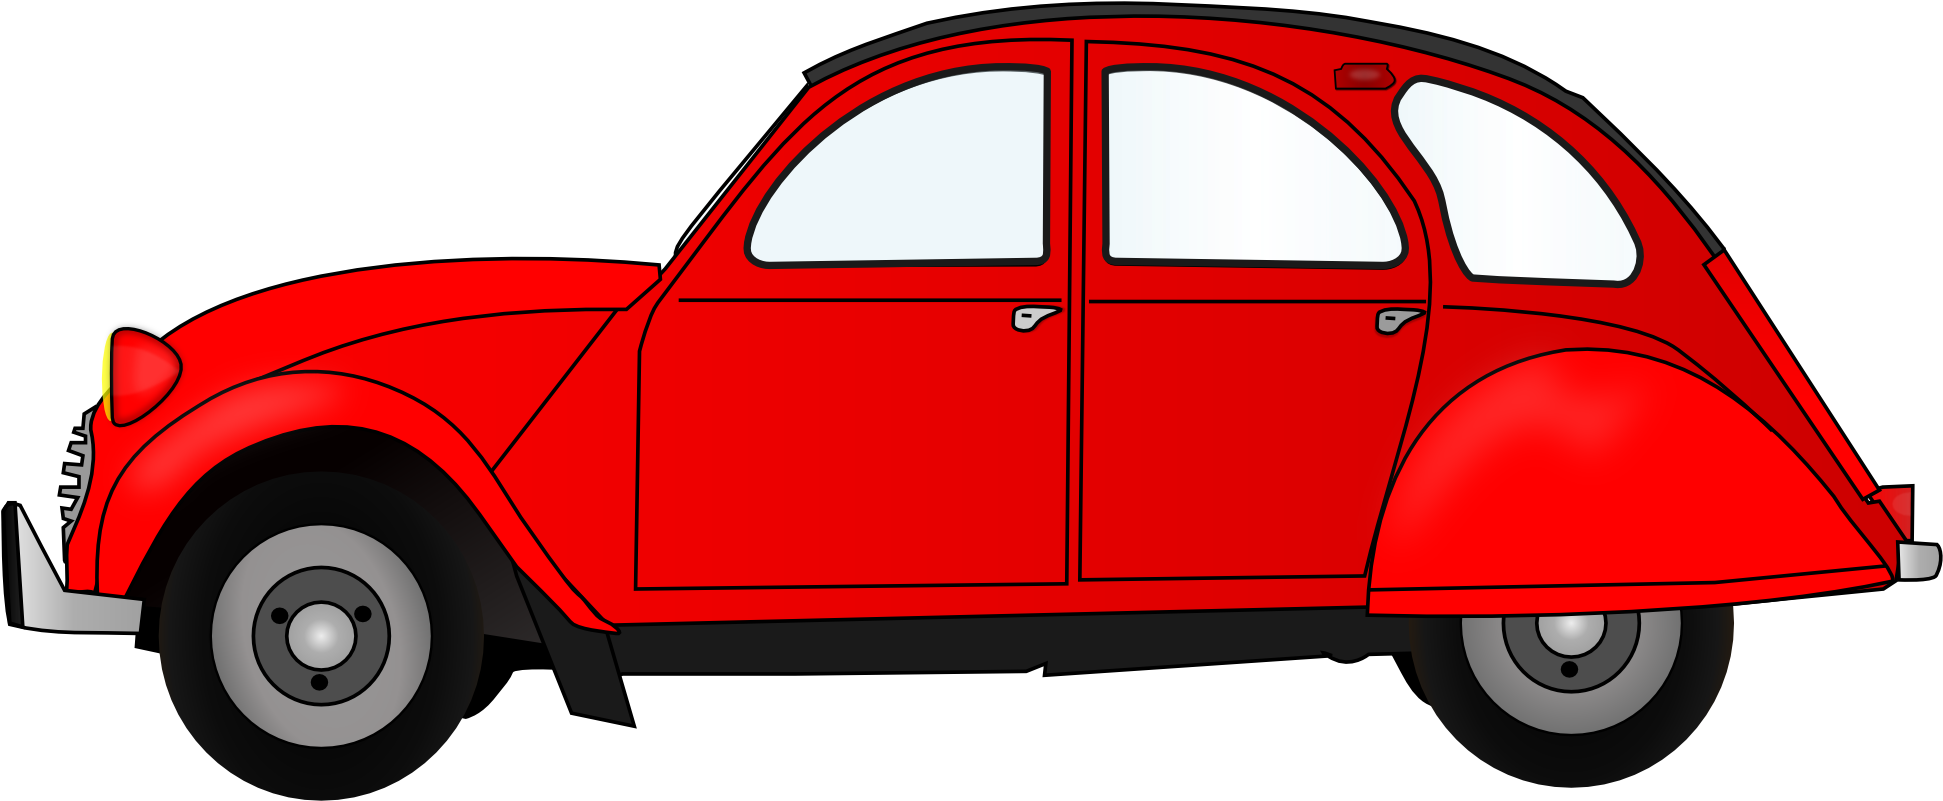 Sports Car Clipart Car Clipart Without Background